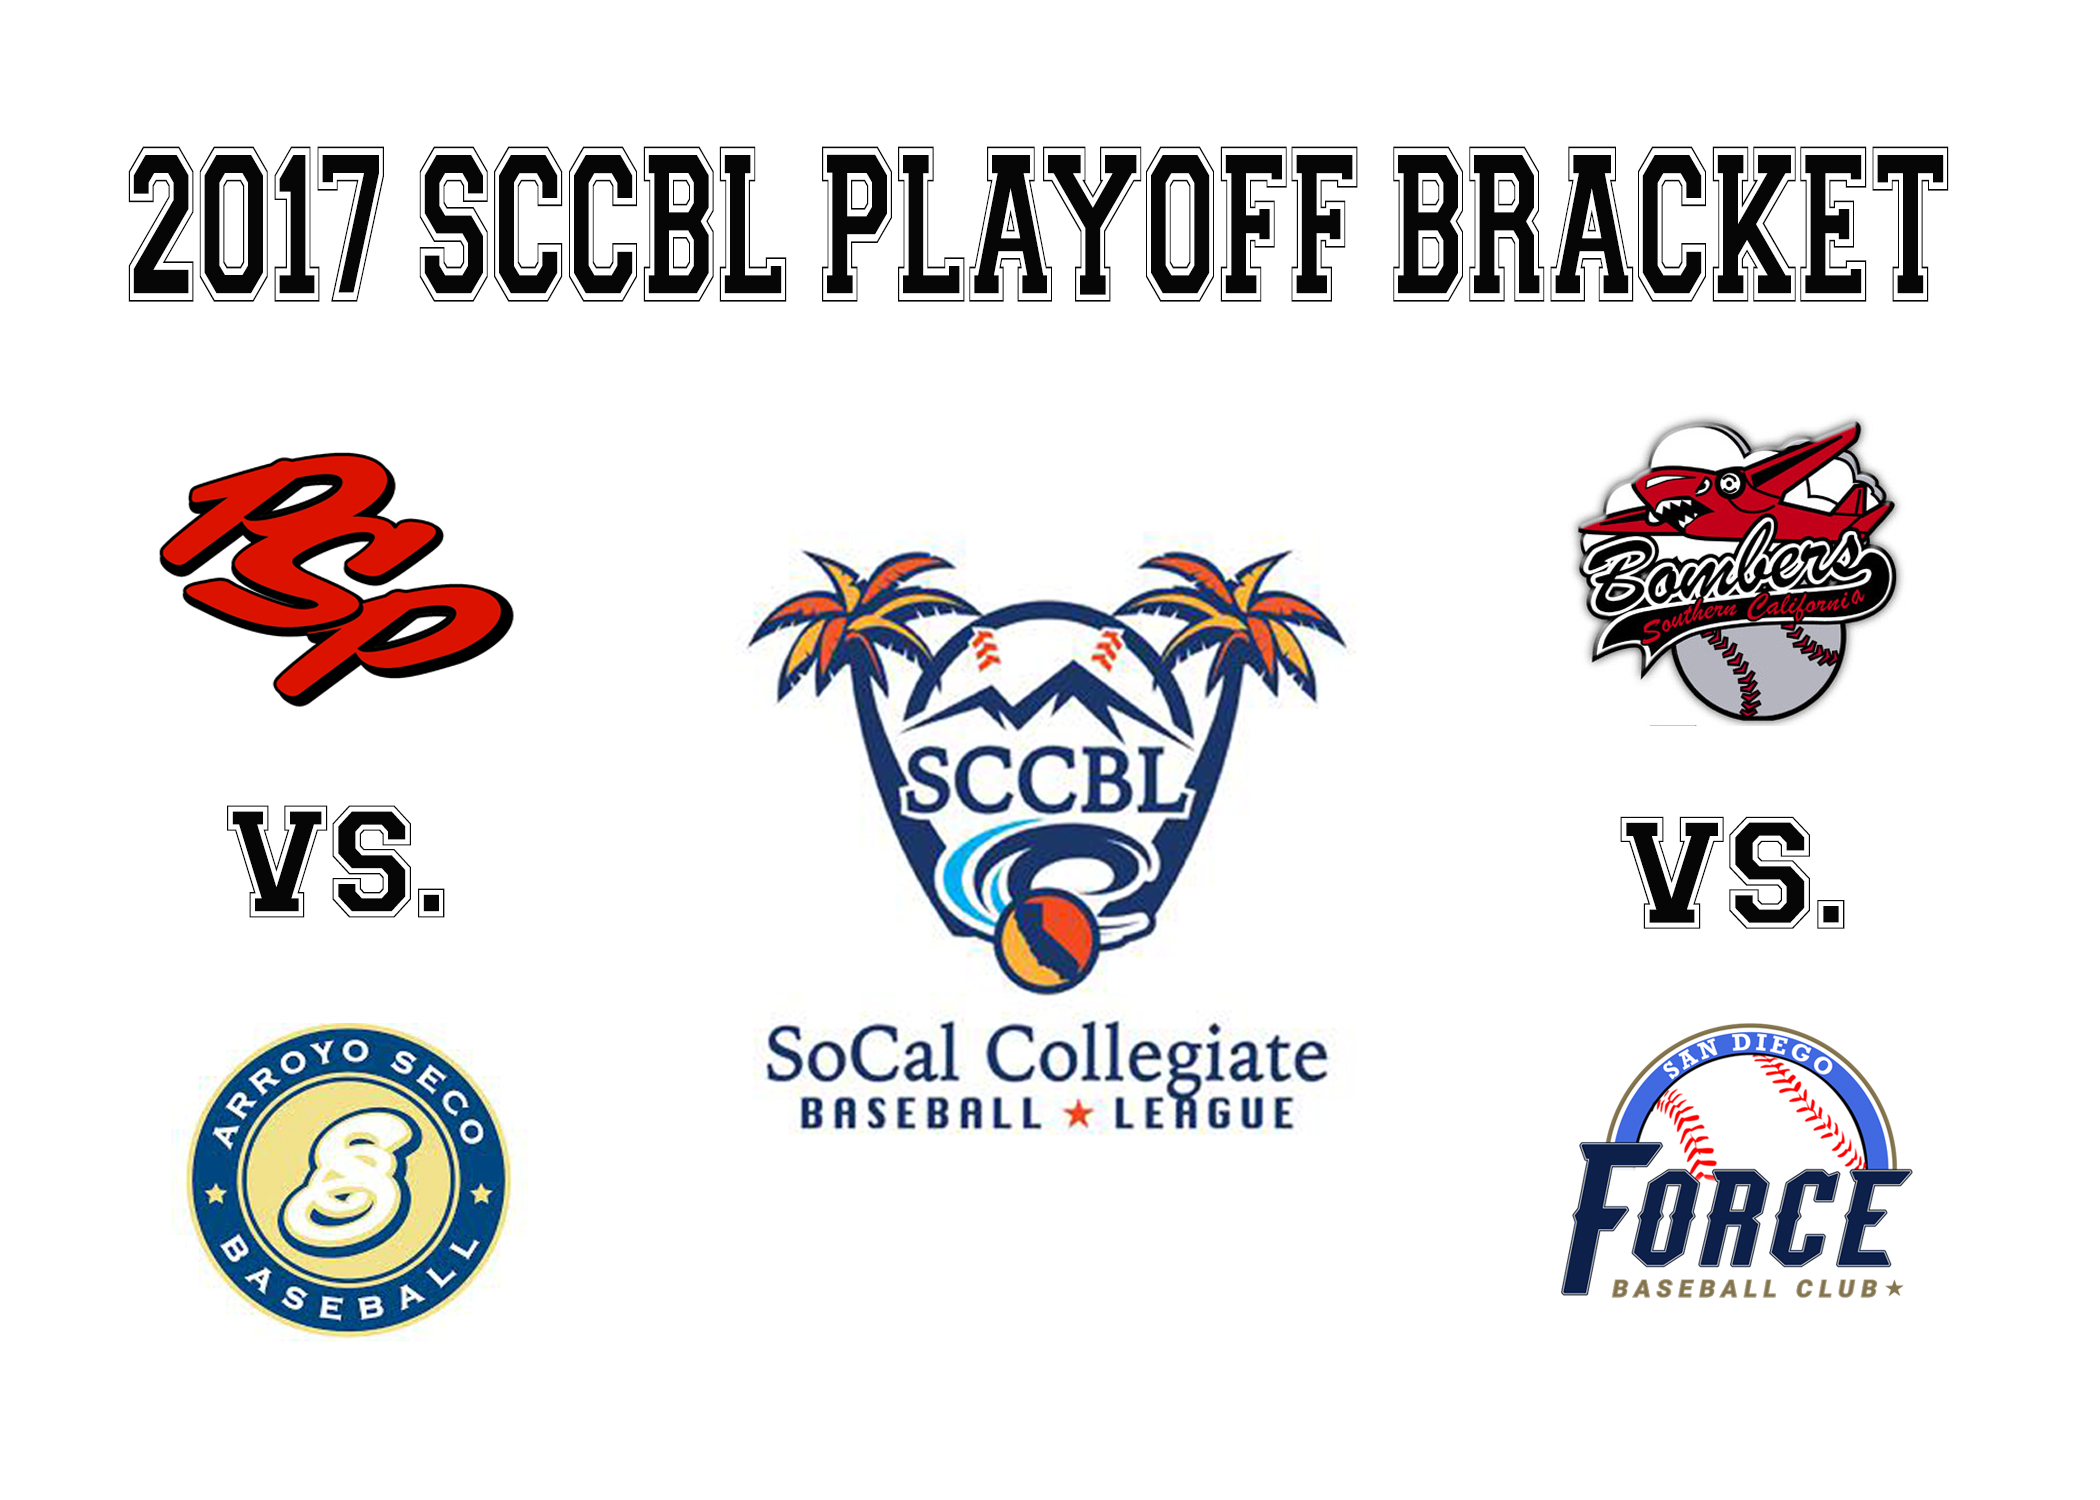 SCCBL PLAYOFF INFO FOR POWER BASEBALL